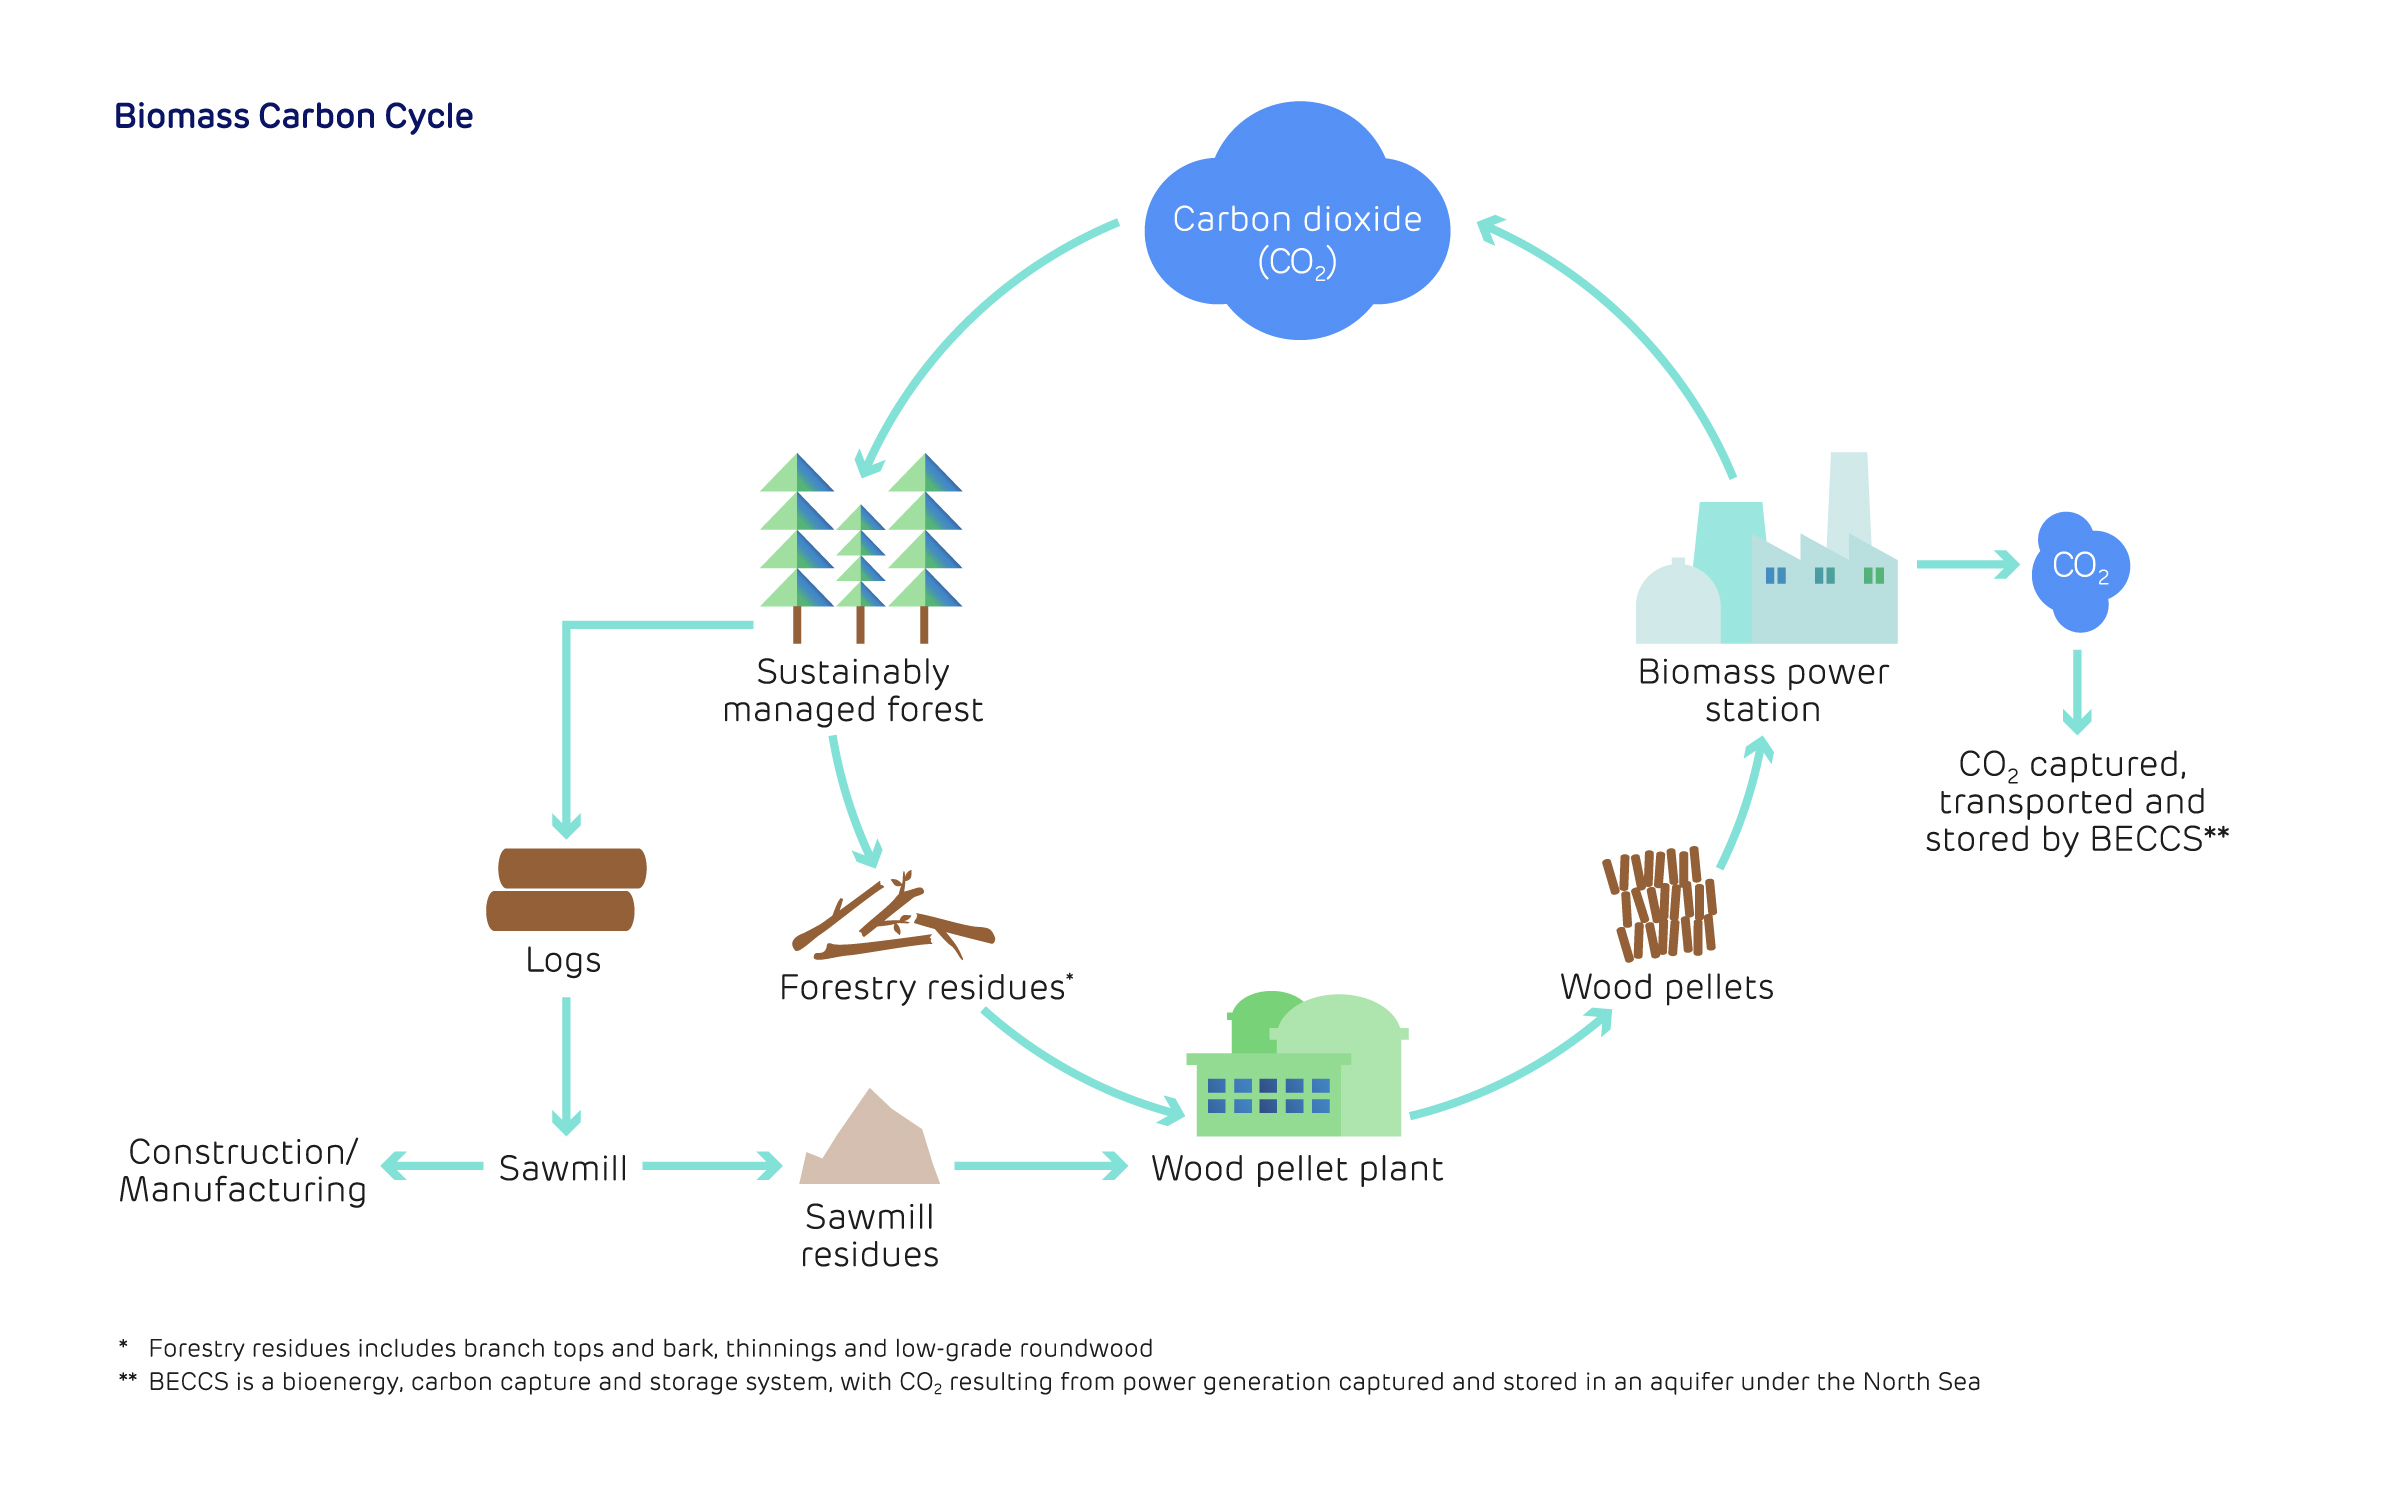 Biomass carbon cycle